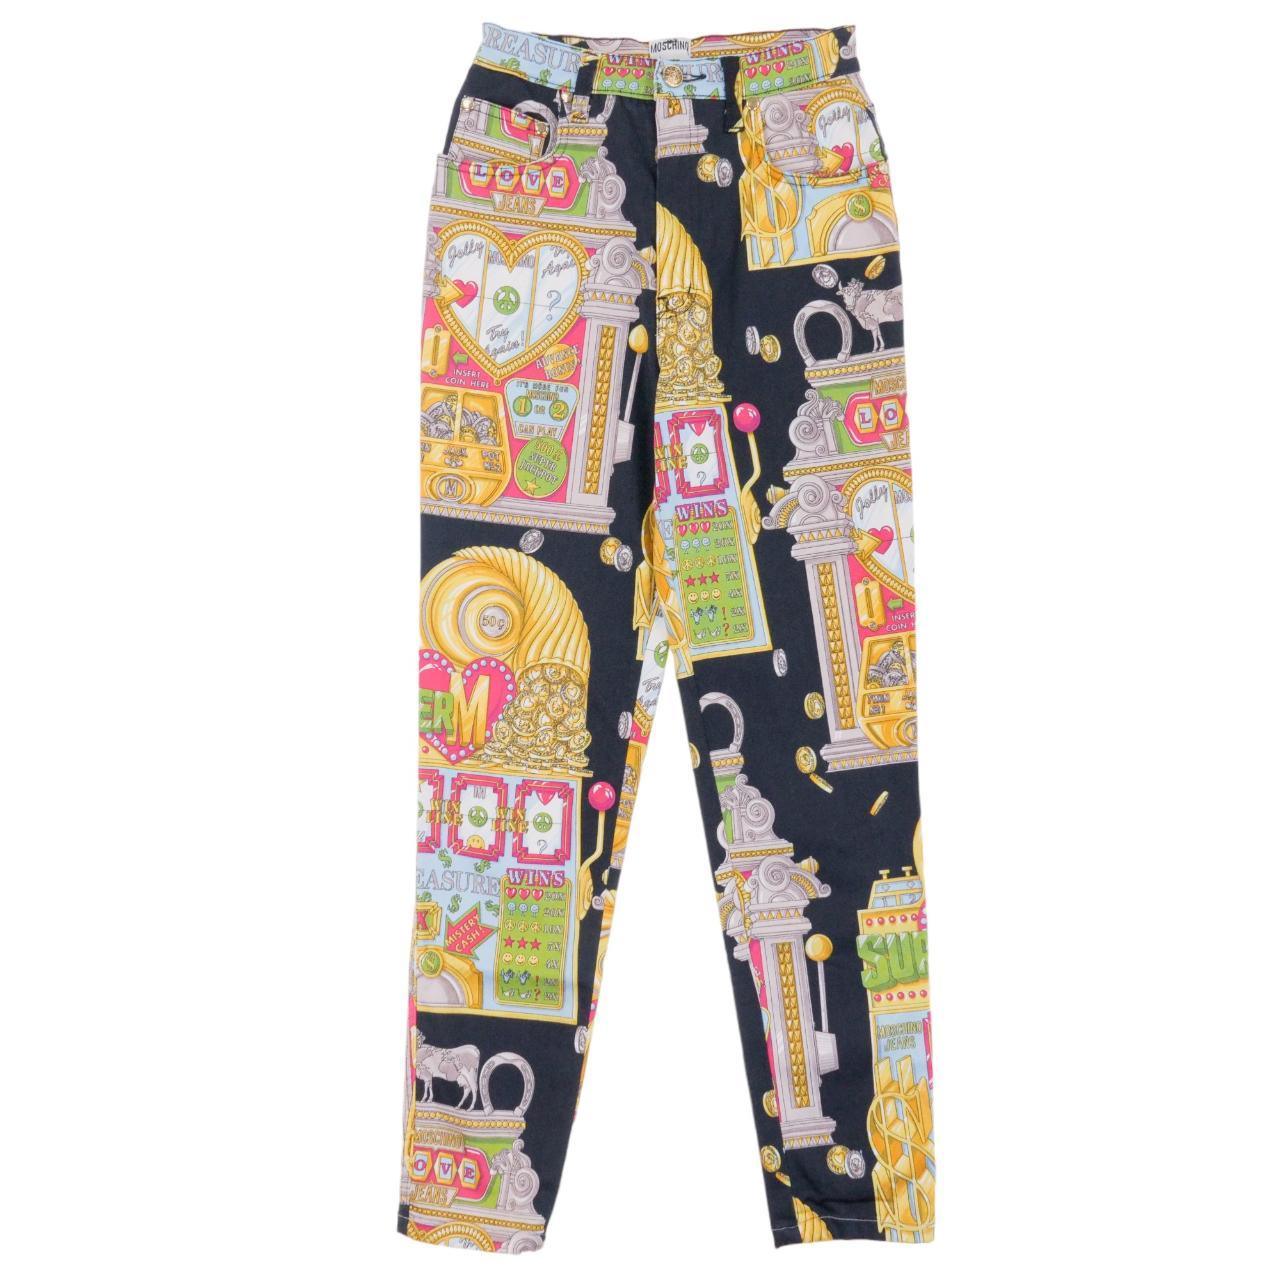 Vintage Moschino Slot Machine Trousers Size W26 - Known Source